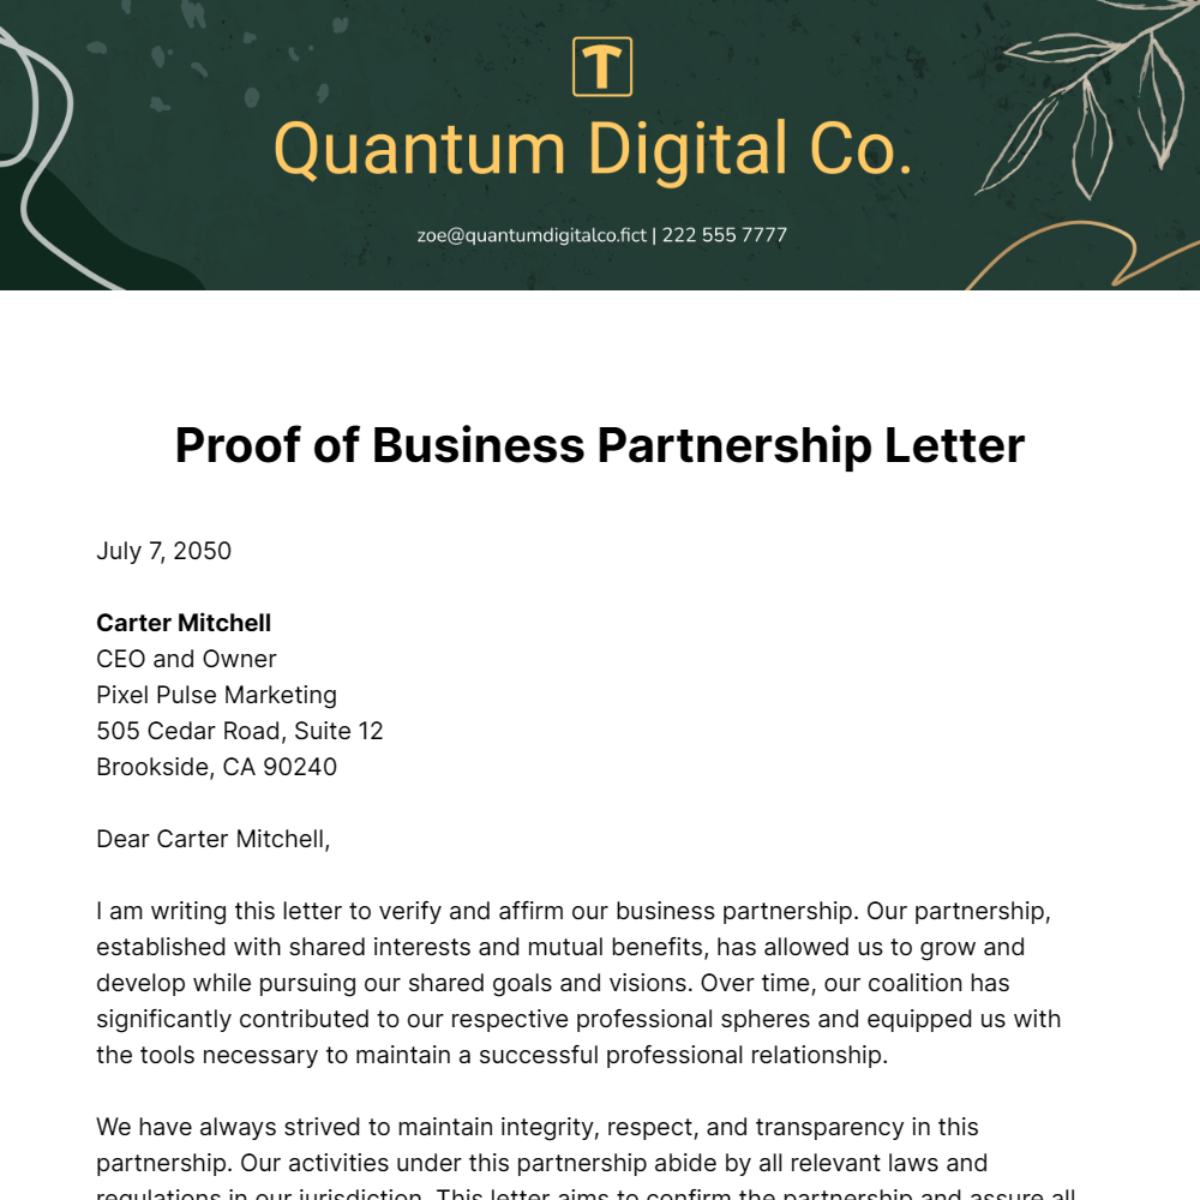 Proof of Business Partnership Letter Template